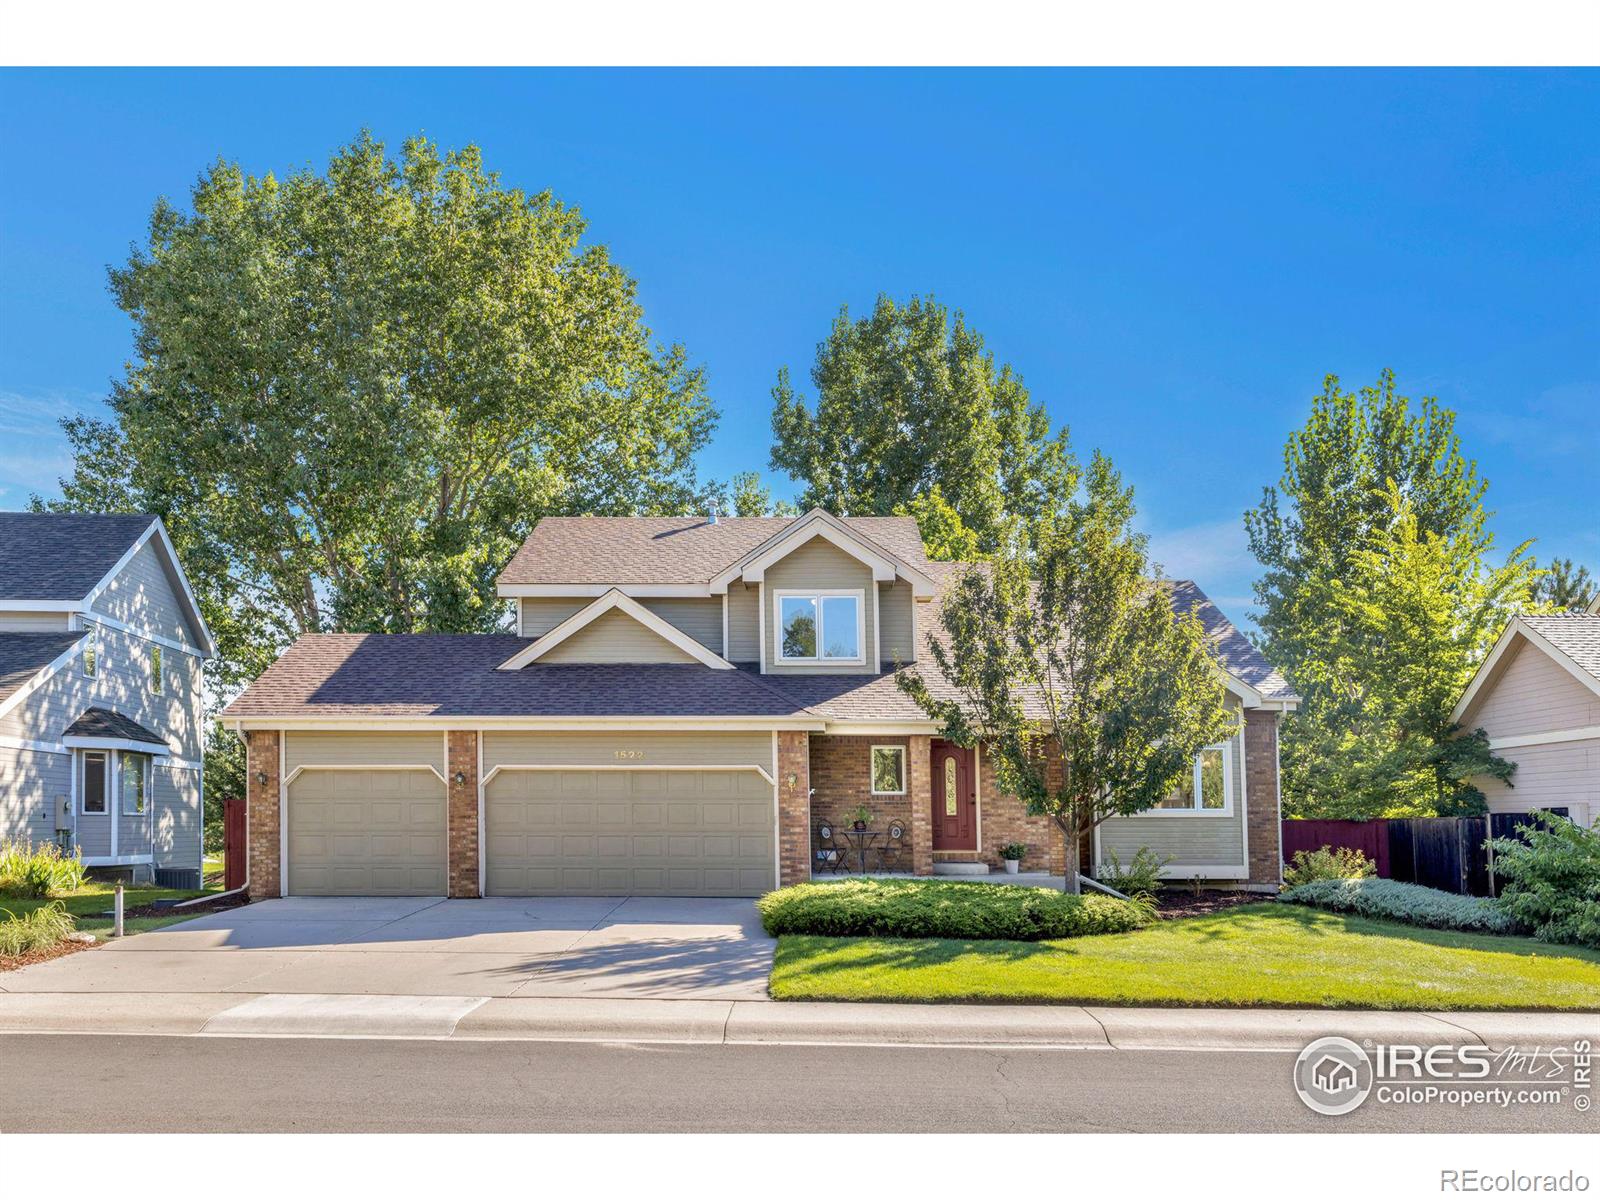 1522  Silvergate Road, fort collins MLS: 123456789995372 Beds: 5 Baths: 4 Price: $725,000